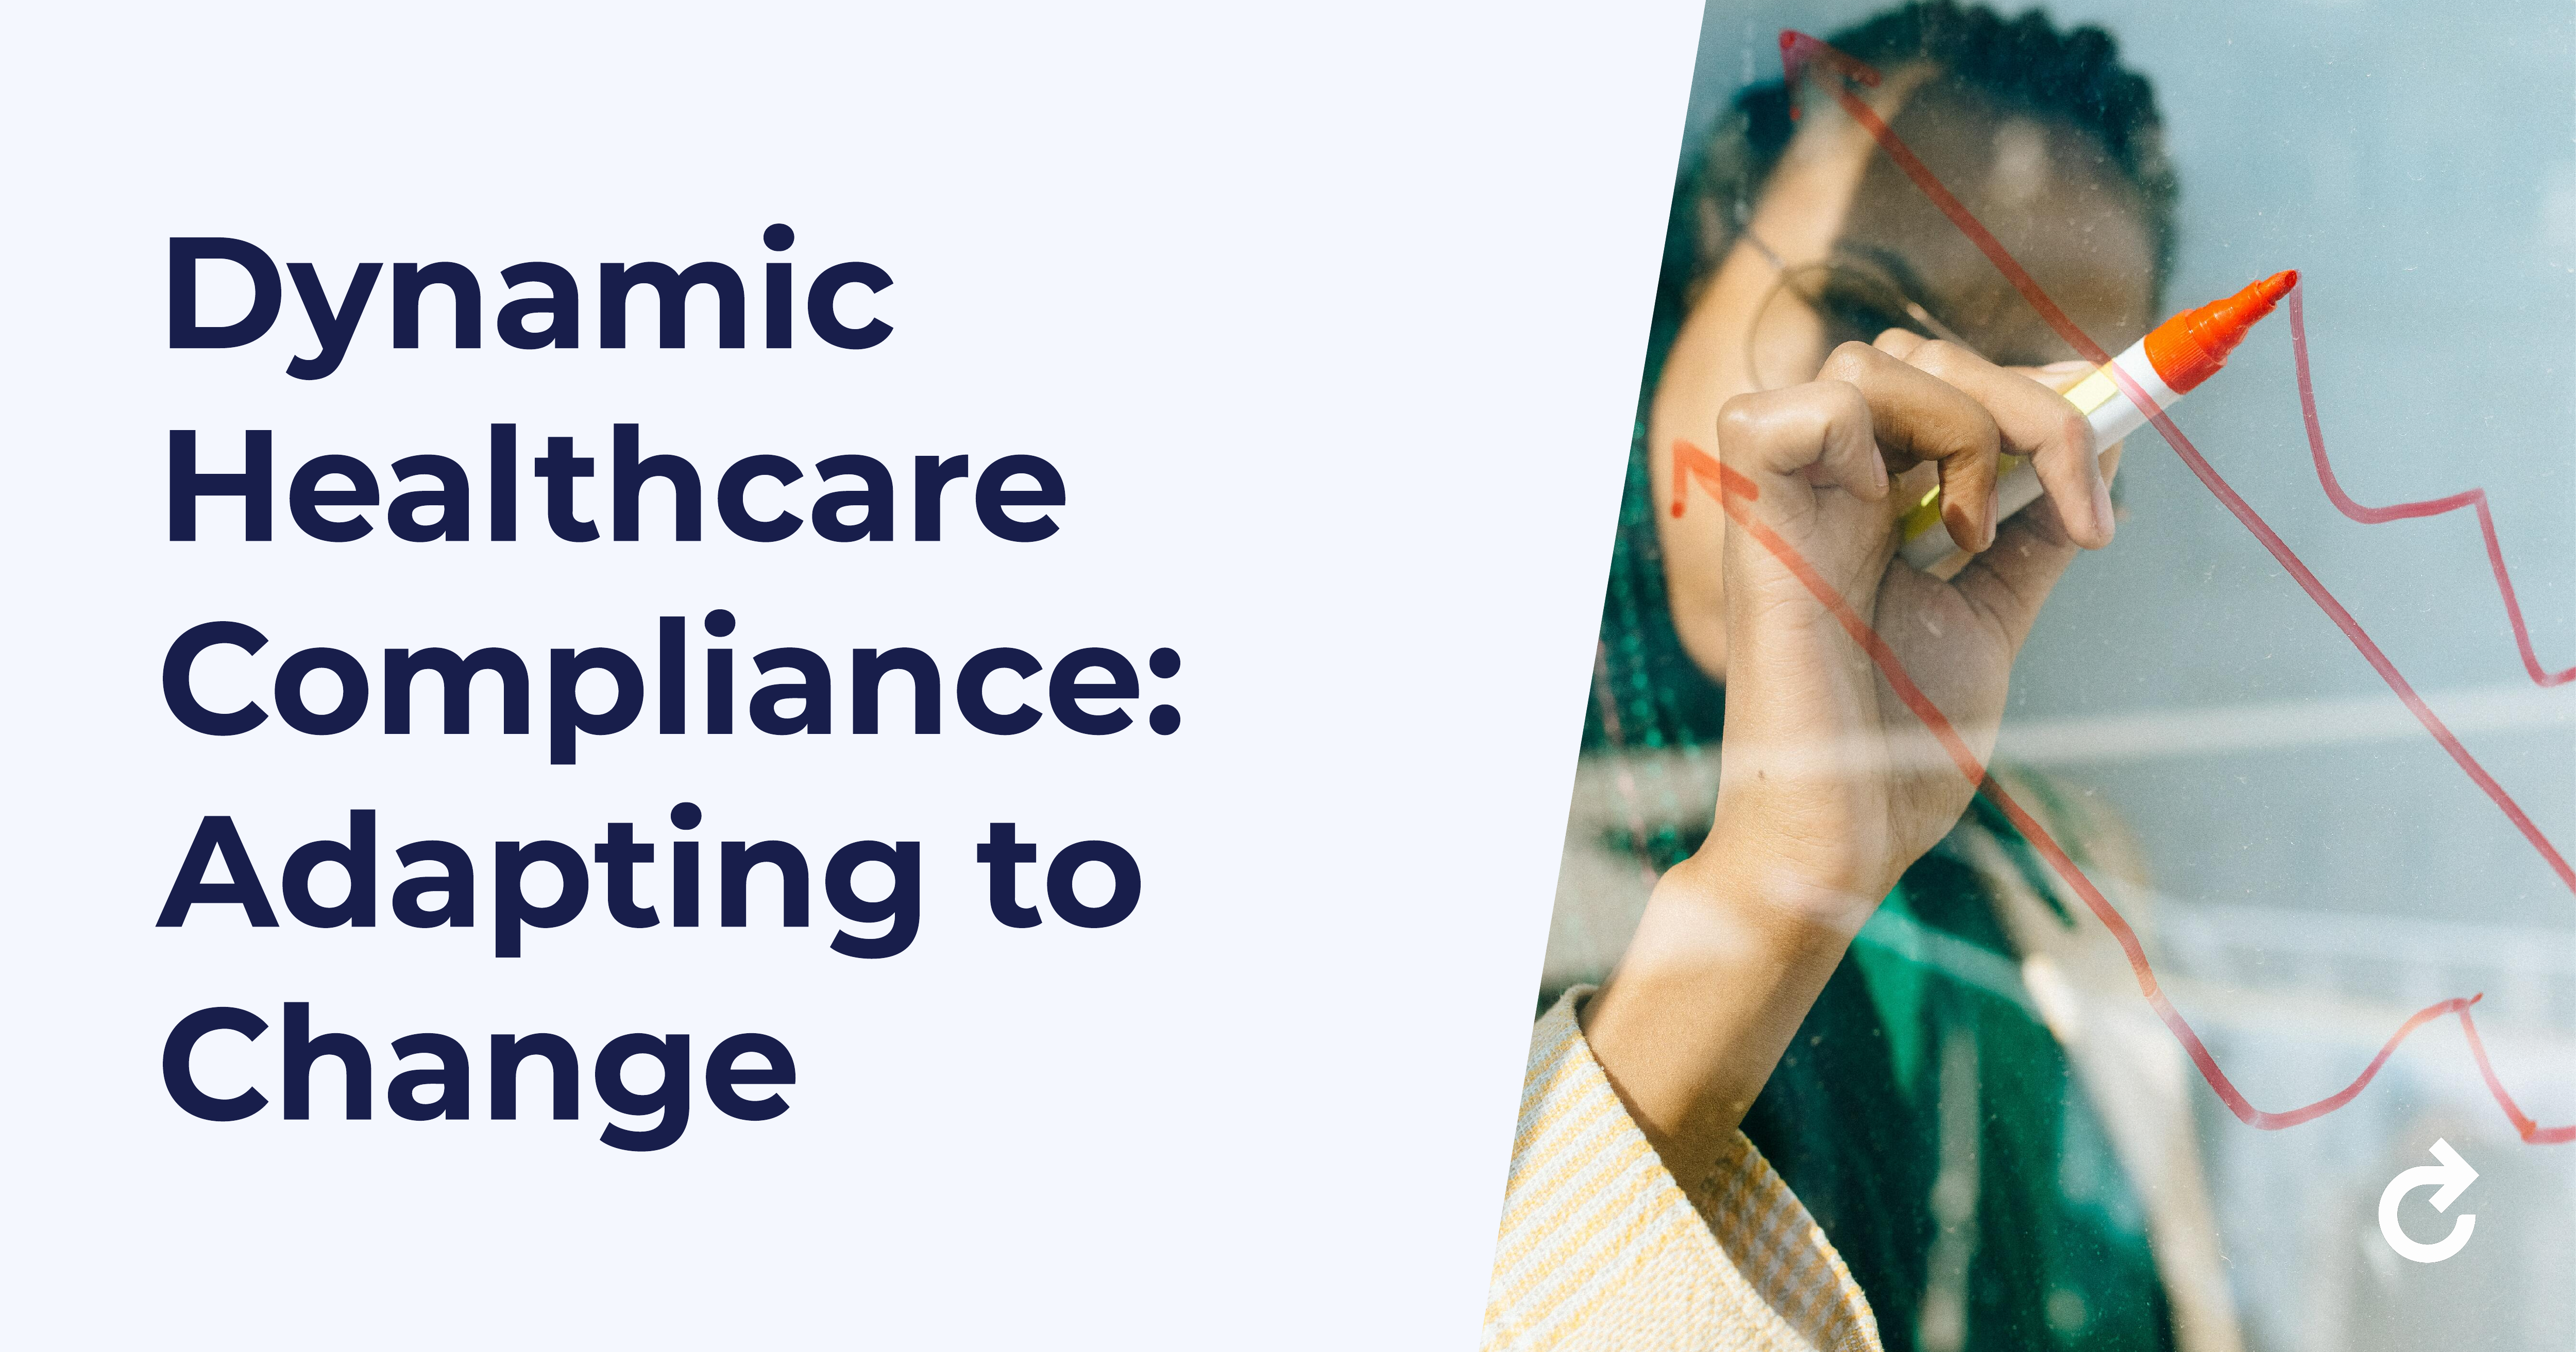 Dynamic Healthcare Compliance: Adapting to Change